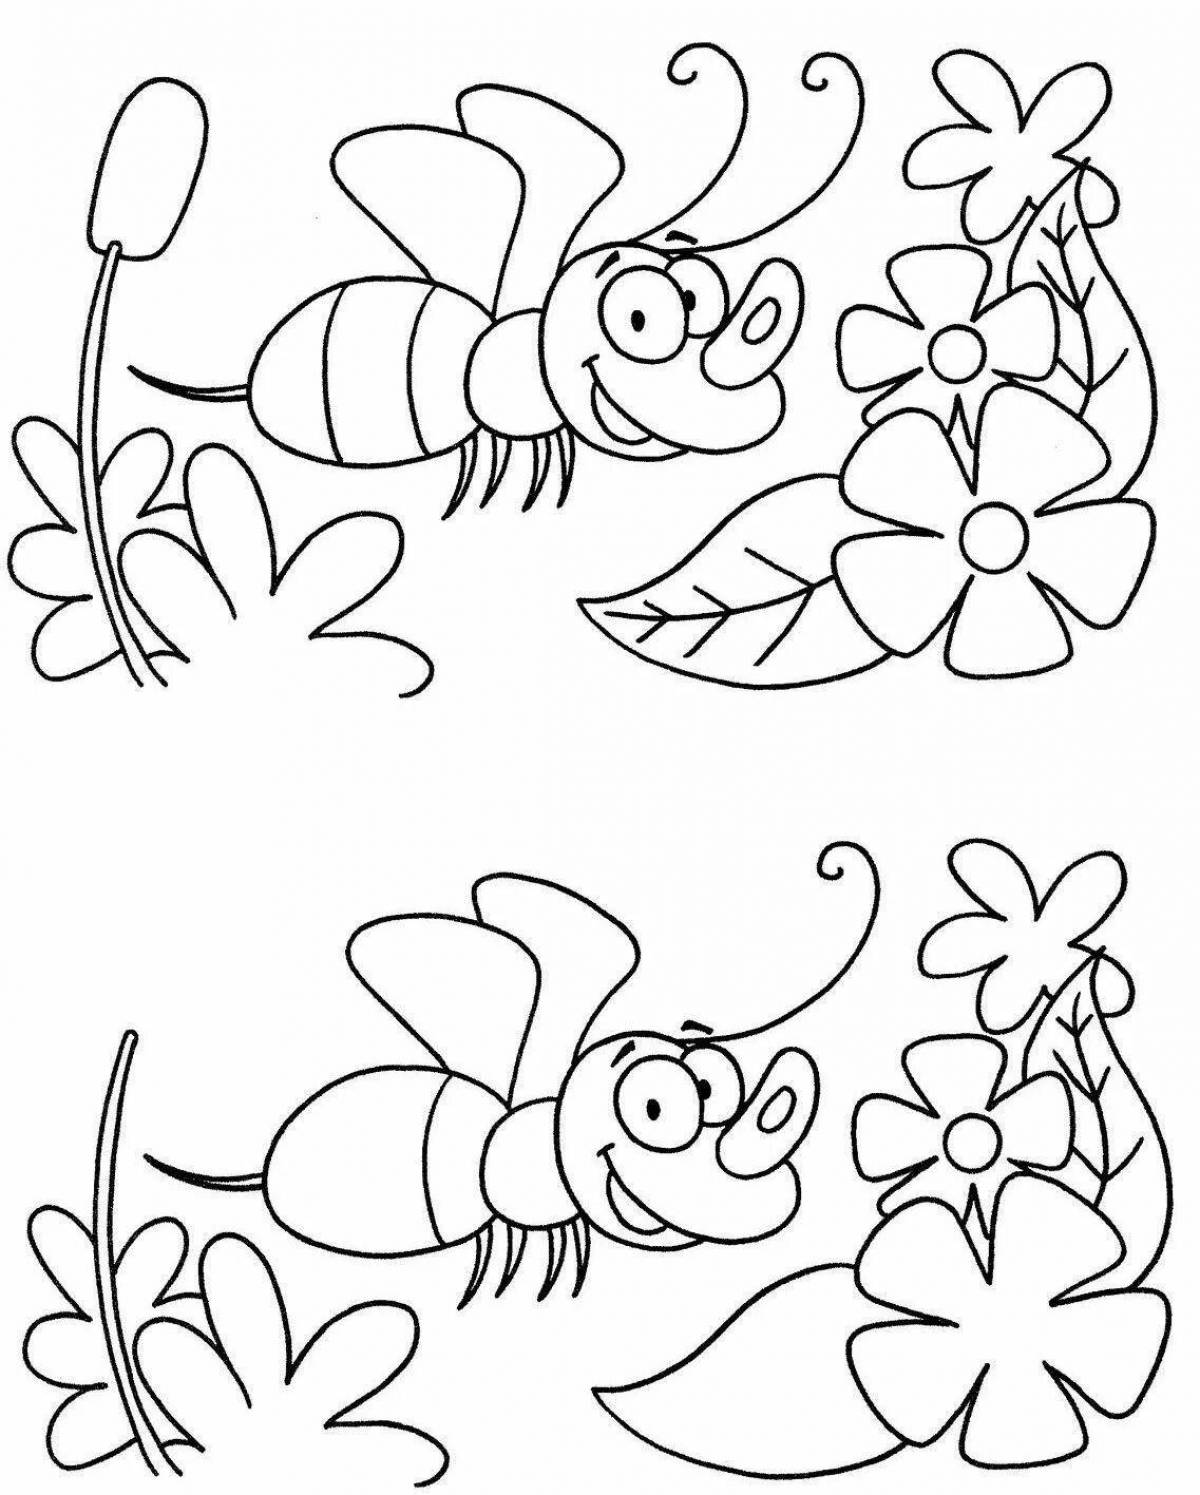 Differences in playful coloring pages